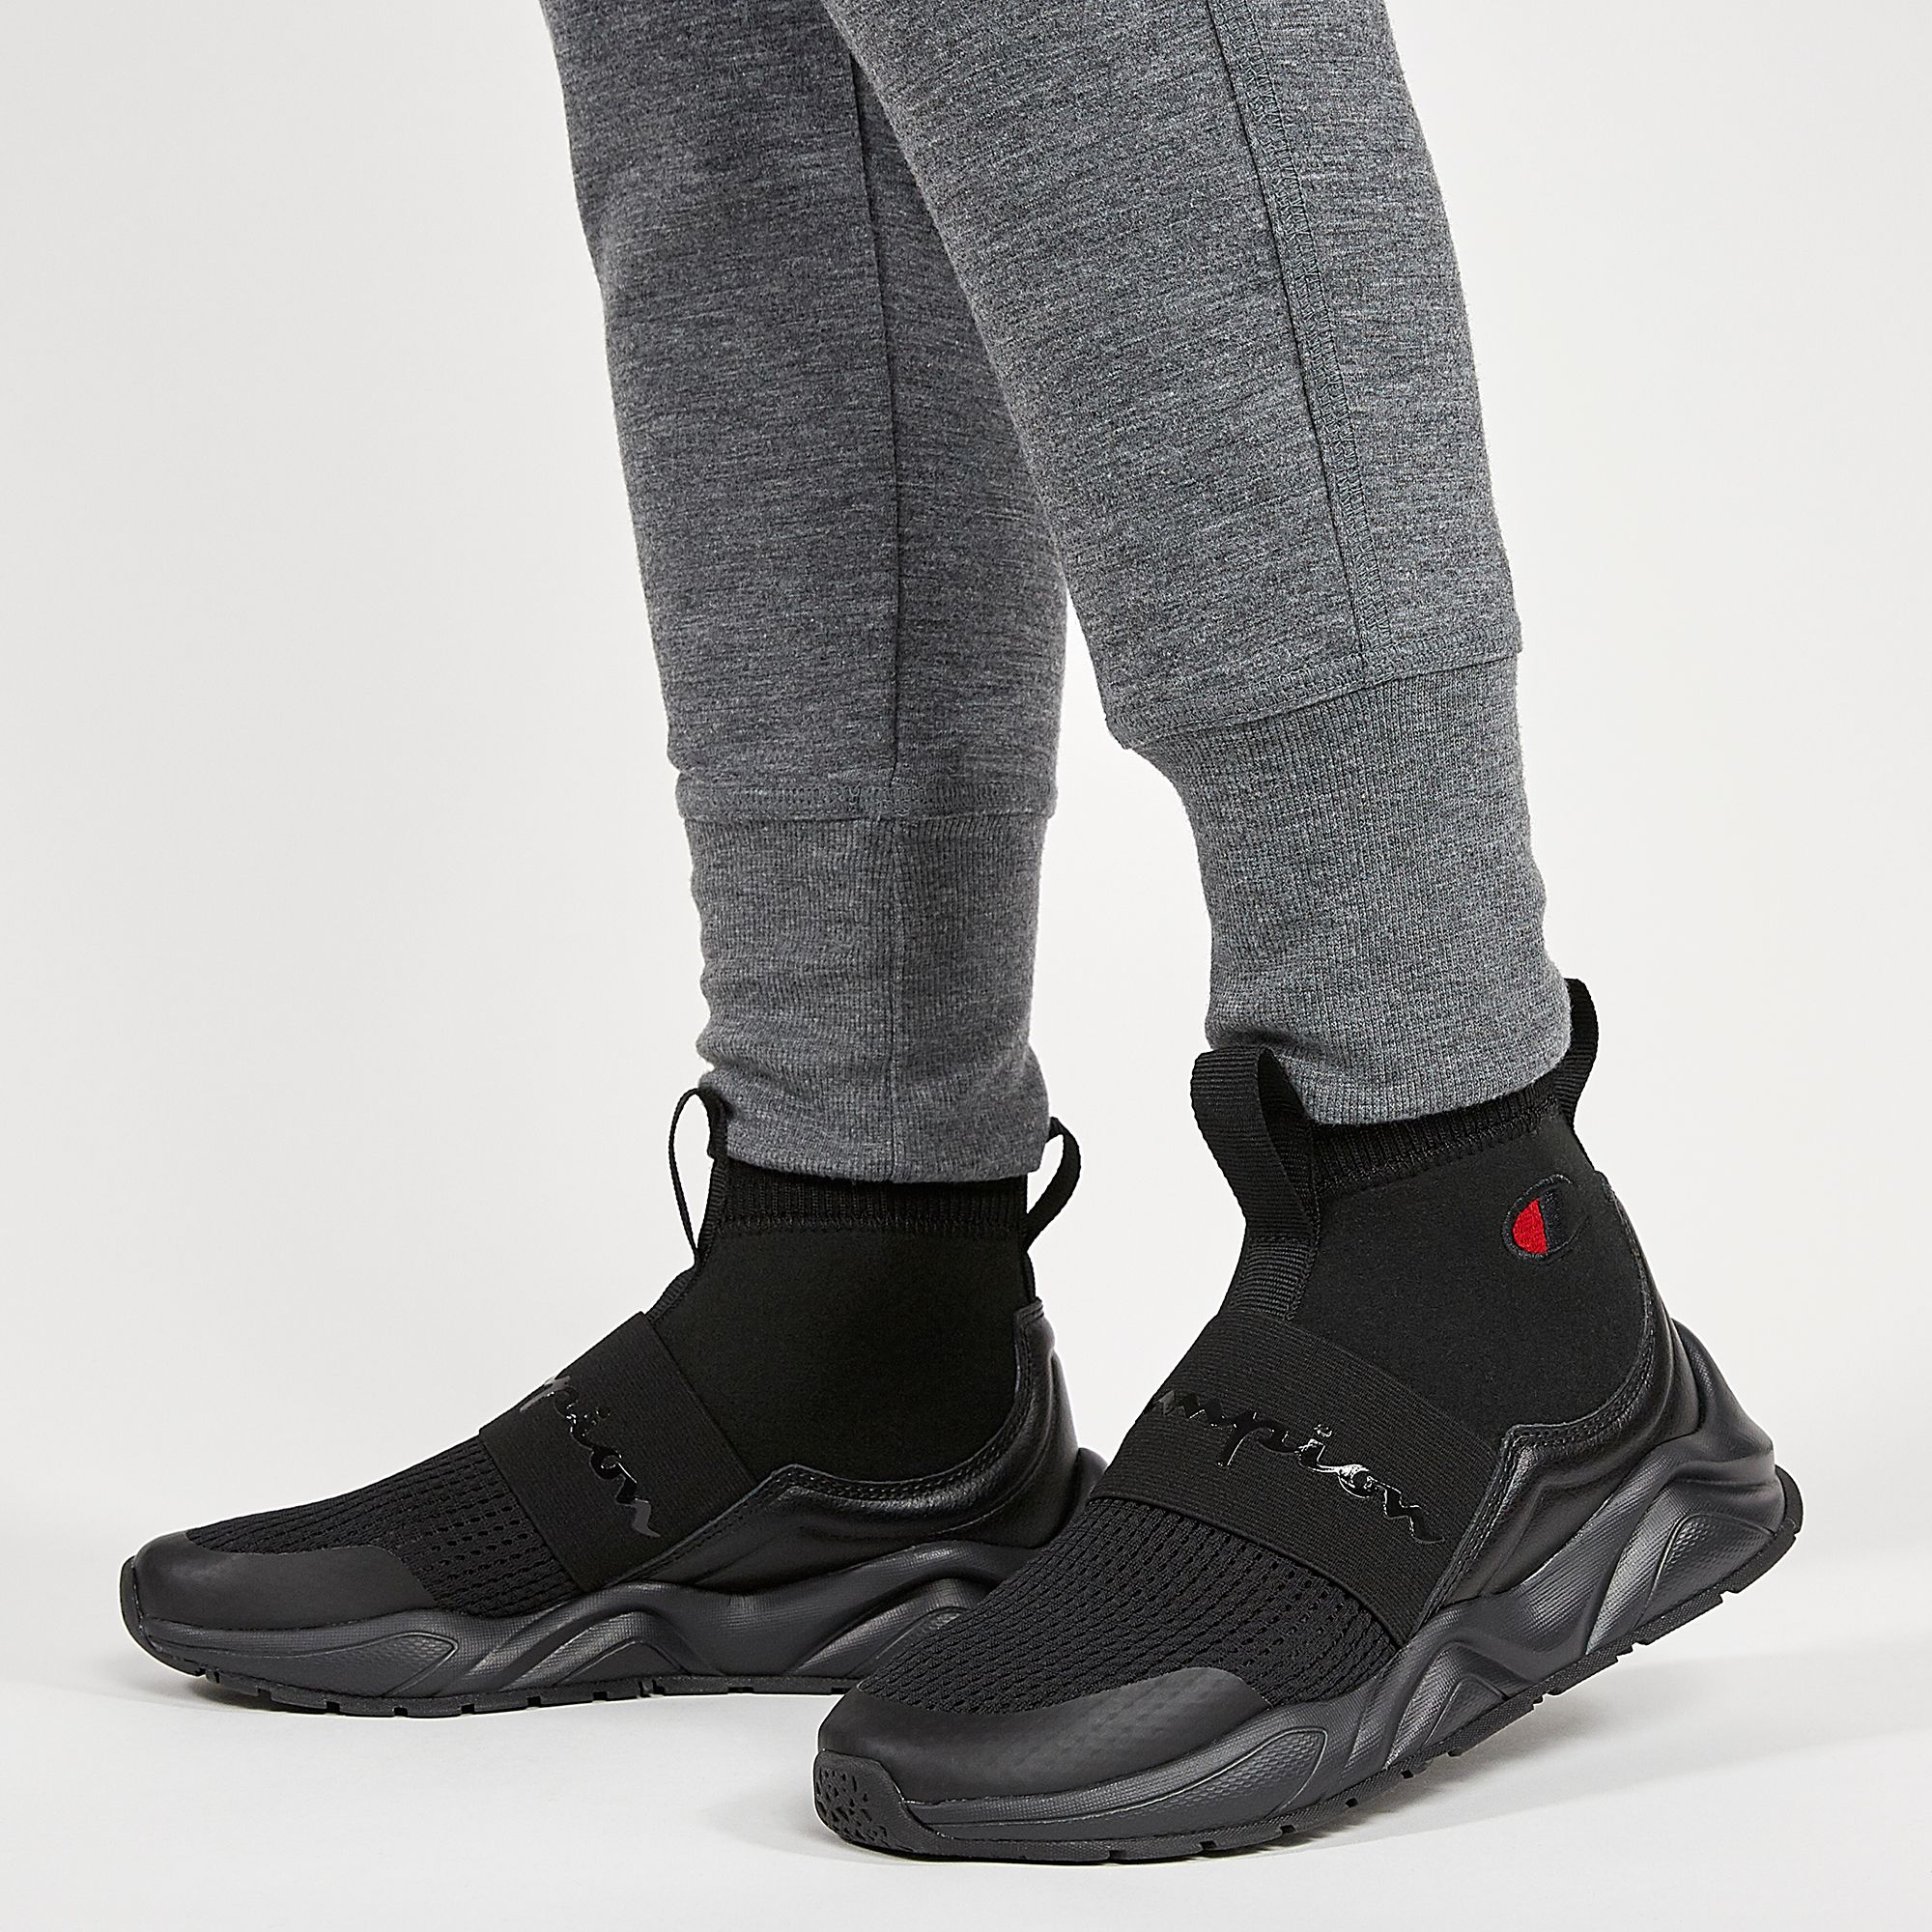 champion shoes rally pro all black